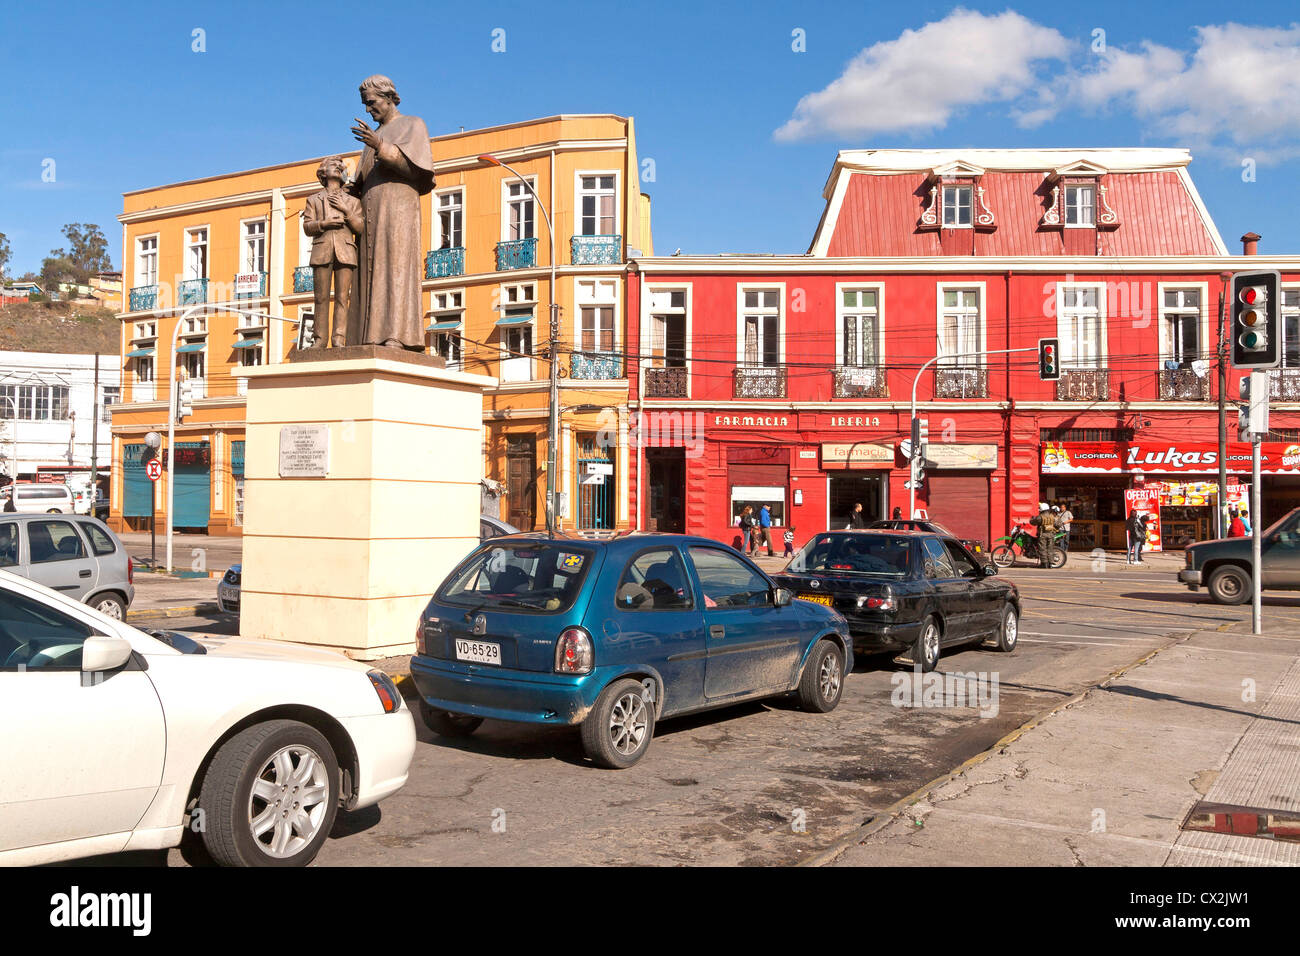 View of colorful buildings, downtown Valparaiso city, Chile Stock Photo